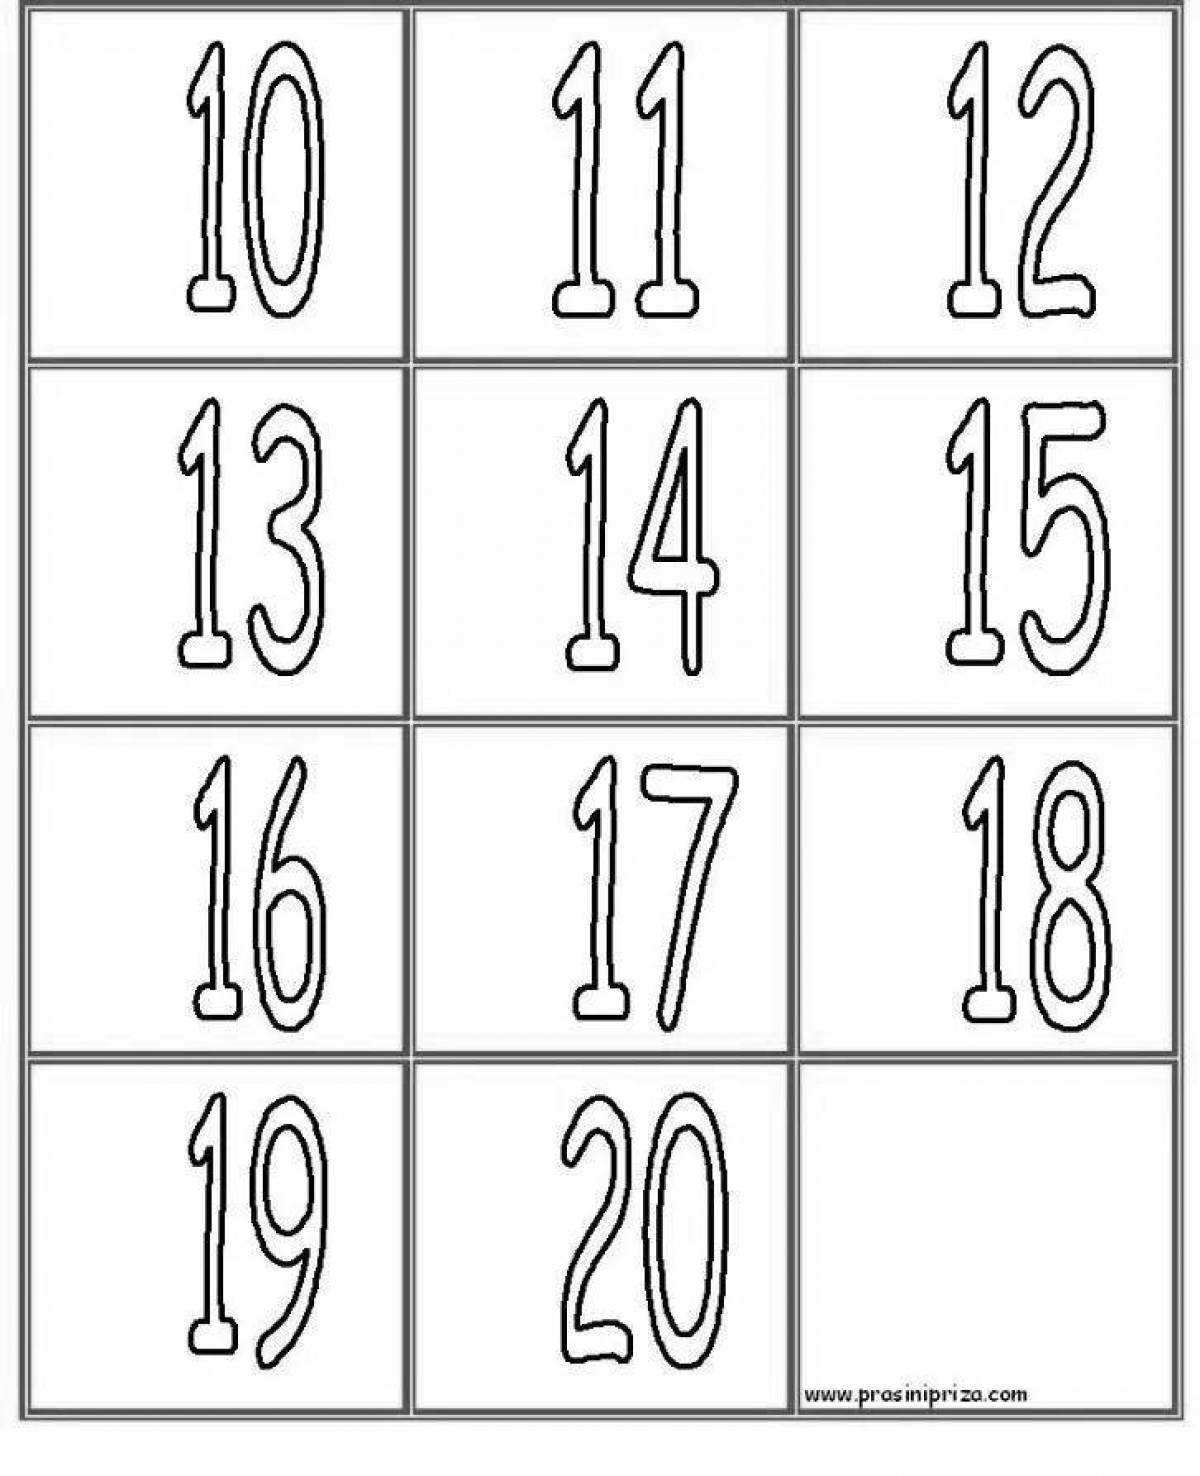 Colored coloring pages with page numbers from 1 to 20